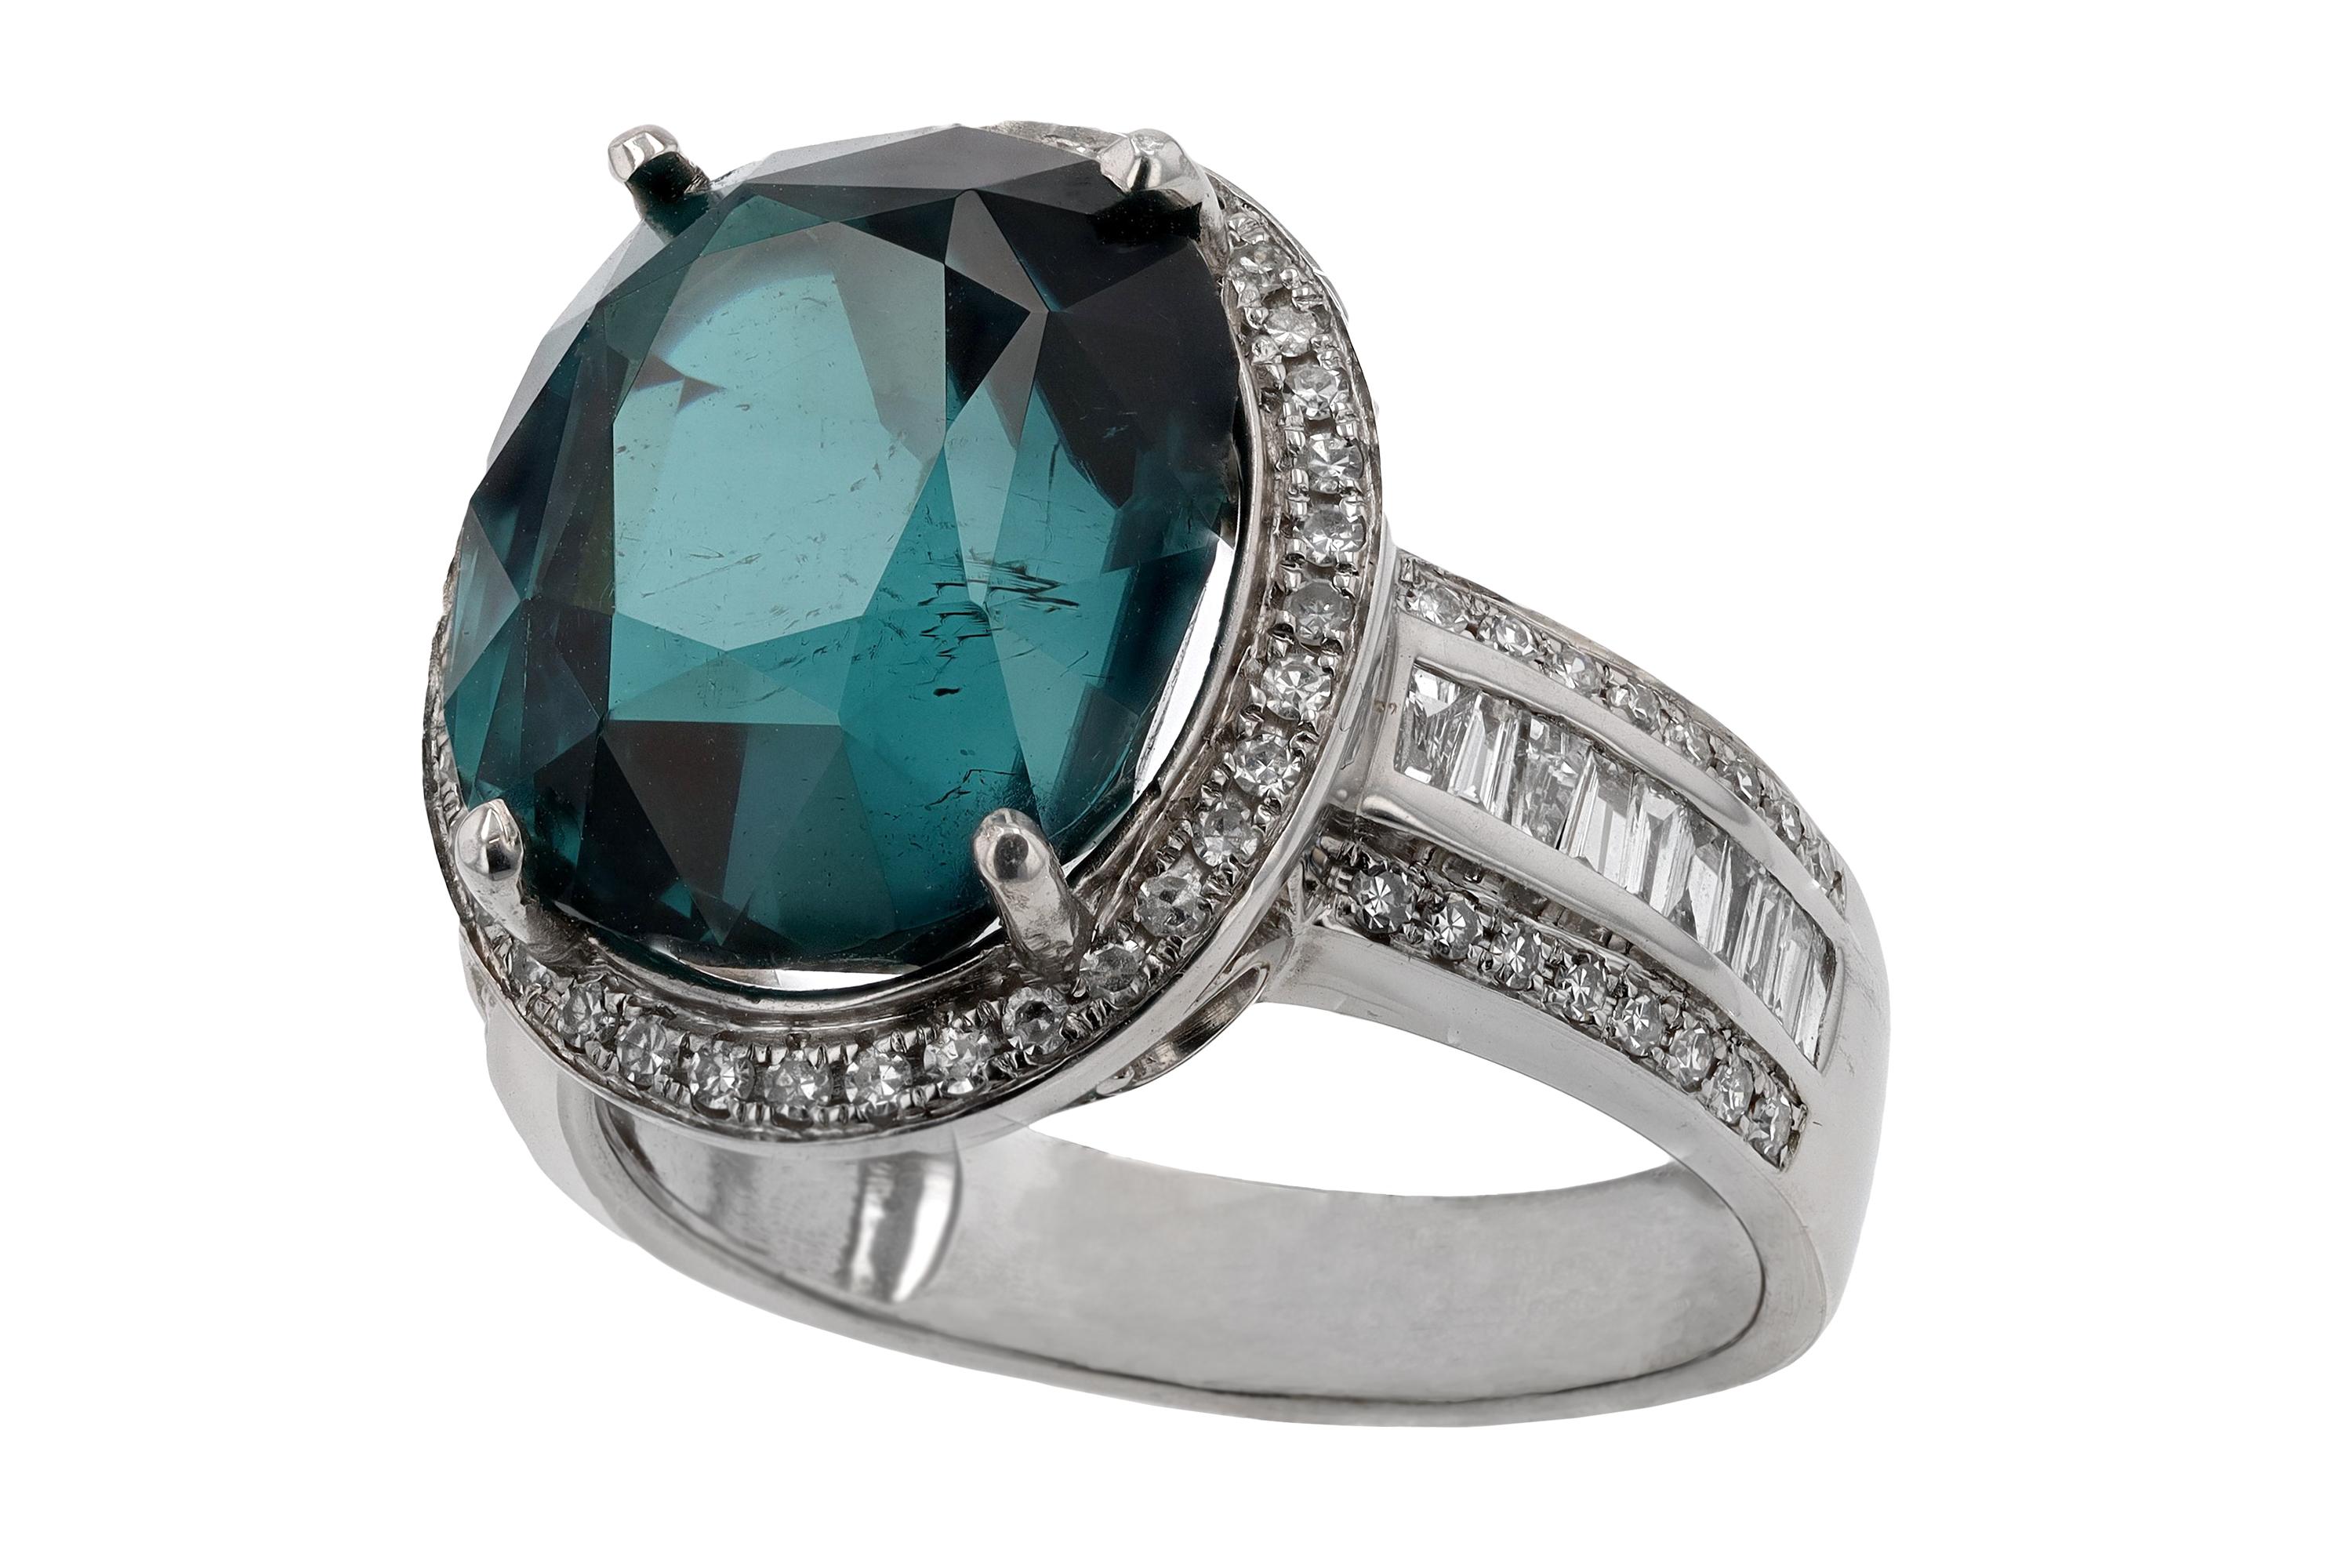  Vintage 9.40 Carat Indicolite Tourmaline and Diamond Cocktail Ring In Excellent Condition For Sale In Santa Barbara, CA